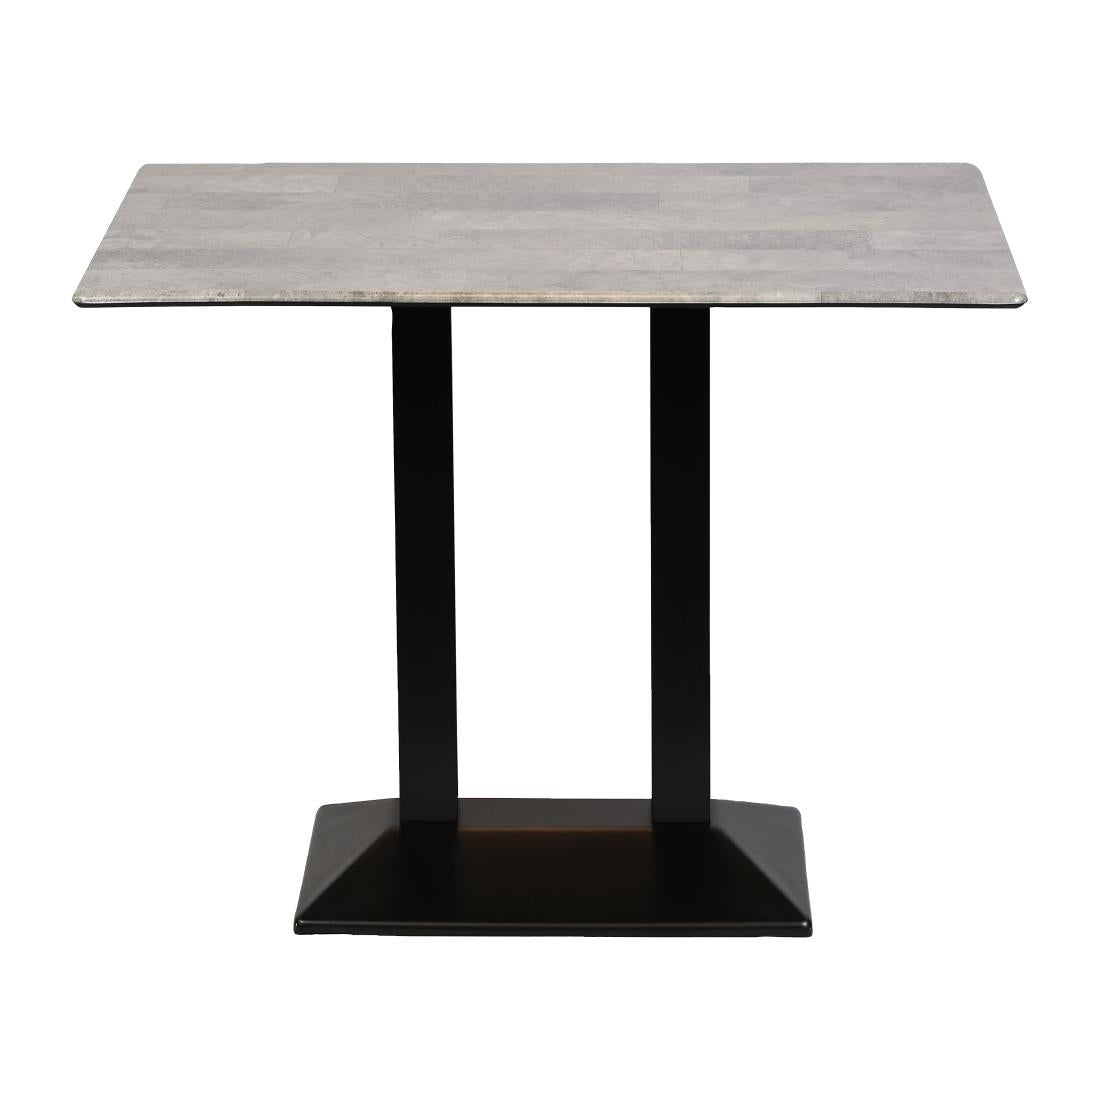 CZ839 Turin Metal Base Rectangular Poseur Table with Laminate Top Concrete 1200x700mm JD Catering Equipment Solutions Ltd